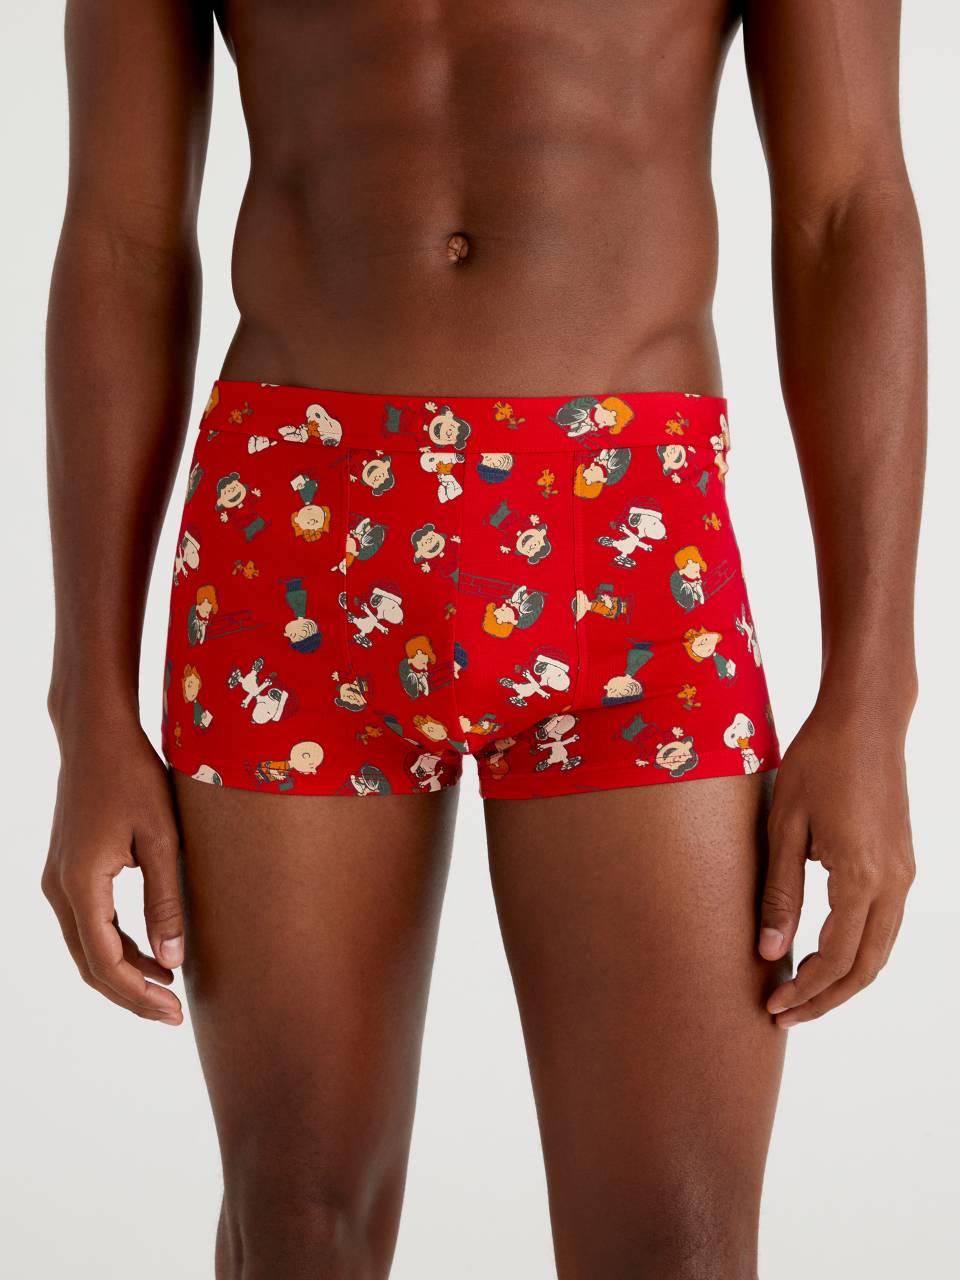 Peanuts Christmas boxers - Red